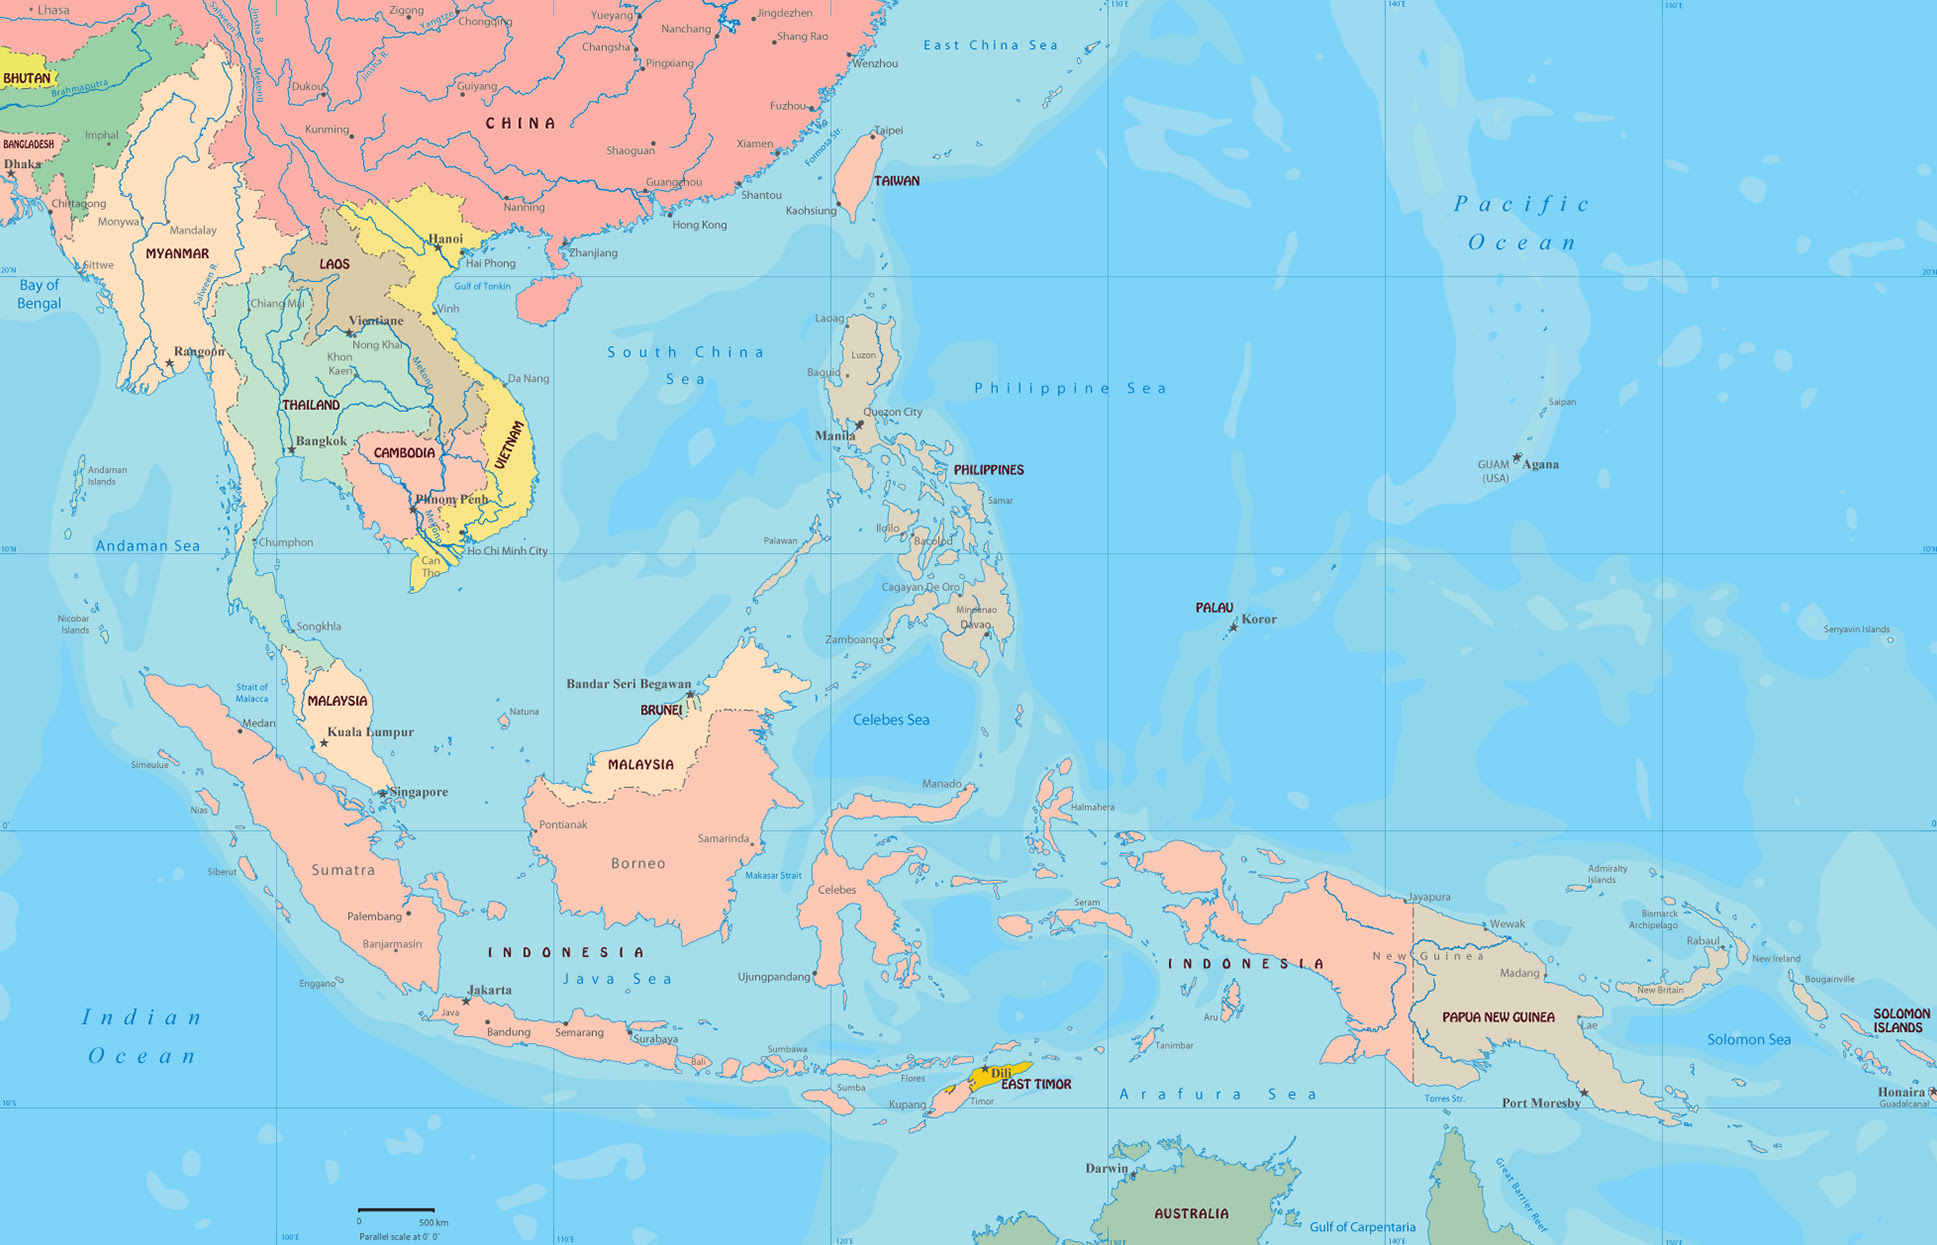 Indonesia Vs Malaysia Map - What's New